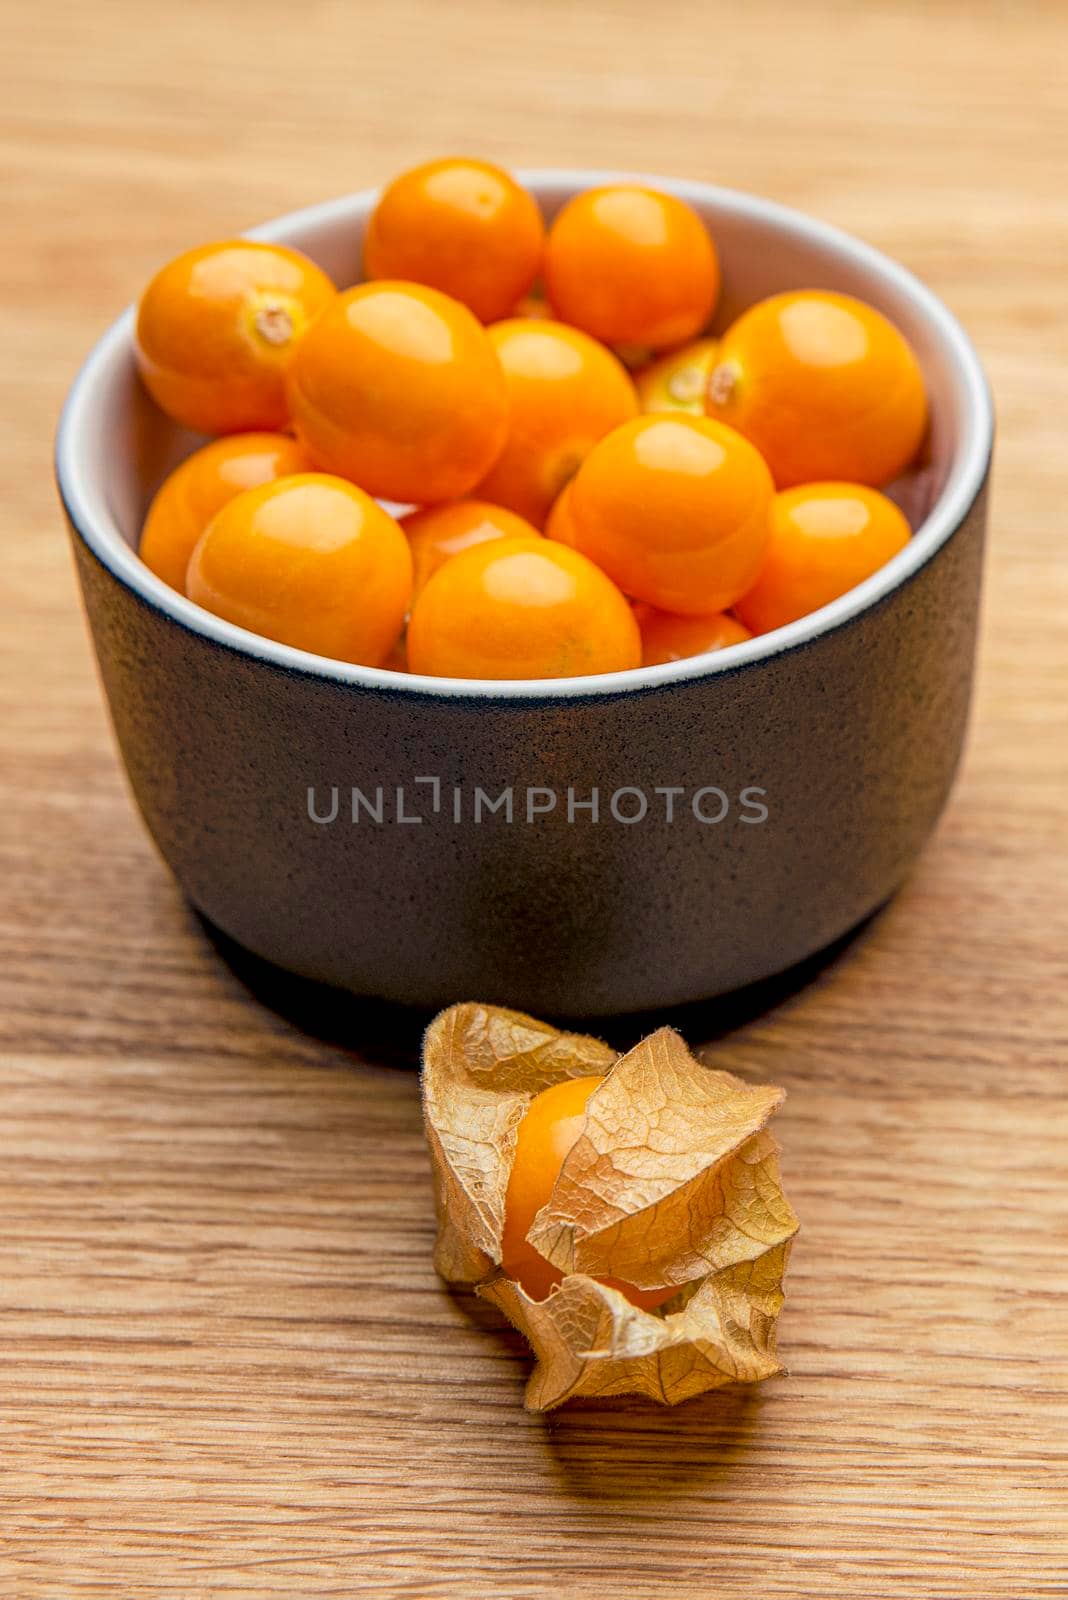 Physalis fruits on a wooden table. Sweet yellow physalis berries in a cup on wood background.